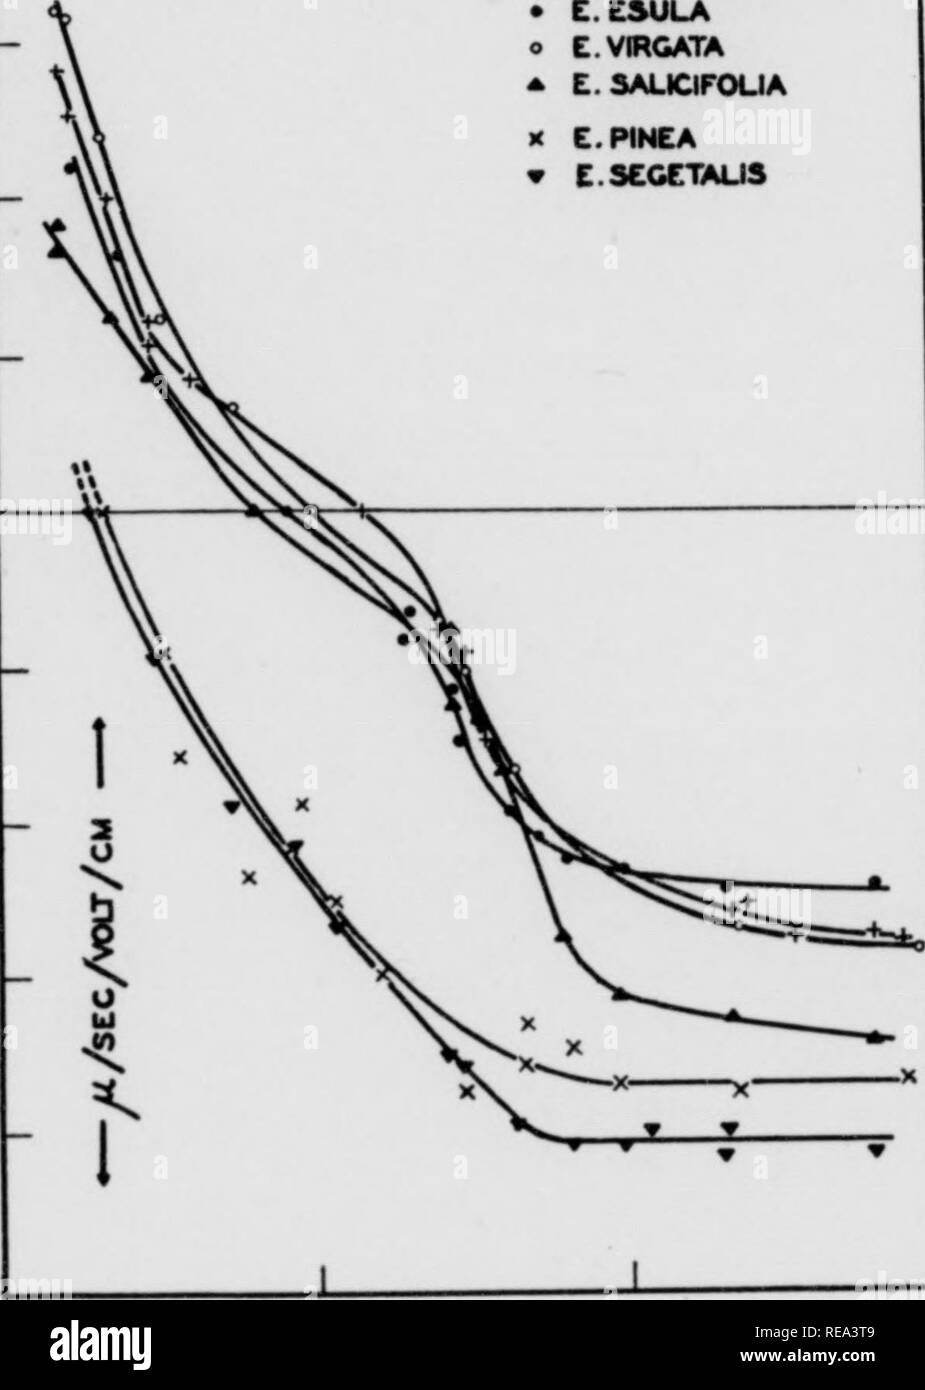 . Contributions from the Botanical Laboratory, vol. 11. Botany; Botany. 9U&gt; 6.0 SO 4.0 pH SO 5.0 Fig. 8, 9. Fig 8 (left). Mobility curves of latex particles from the section Tithy- malus, sub-section Galarrhaei, with smooth capsules. Fig. 9 (right). From the group With warty capsules. ^ ^ losa and pH 4.1 for E. lagascae. On the basic side of the range both curves show a hump, but E. pilosa reaches a plateau on both sides before E. lagascae (hg. 8). Protein reactions were low in this group. ttt Capsule covered by hemispherical, cylindrical or filamentous, elongated warts. Â° Here, E. polychr Stock Photo